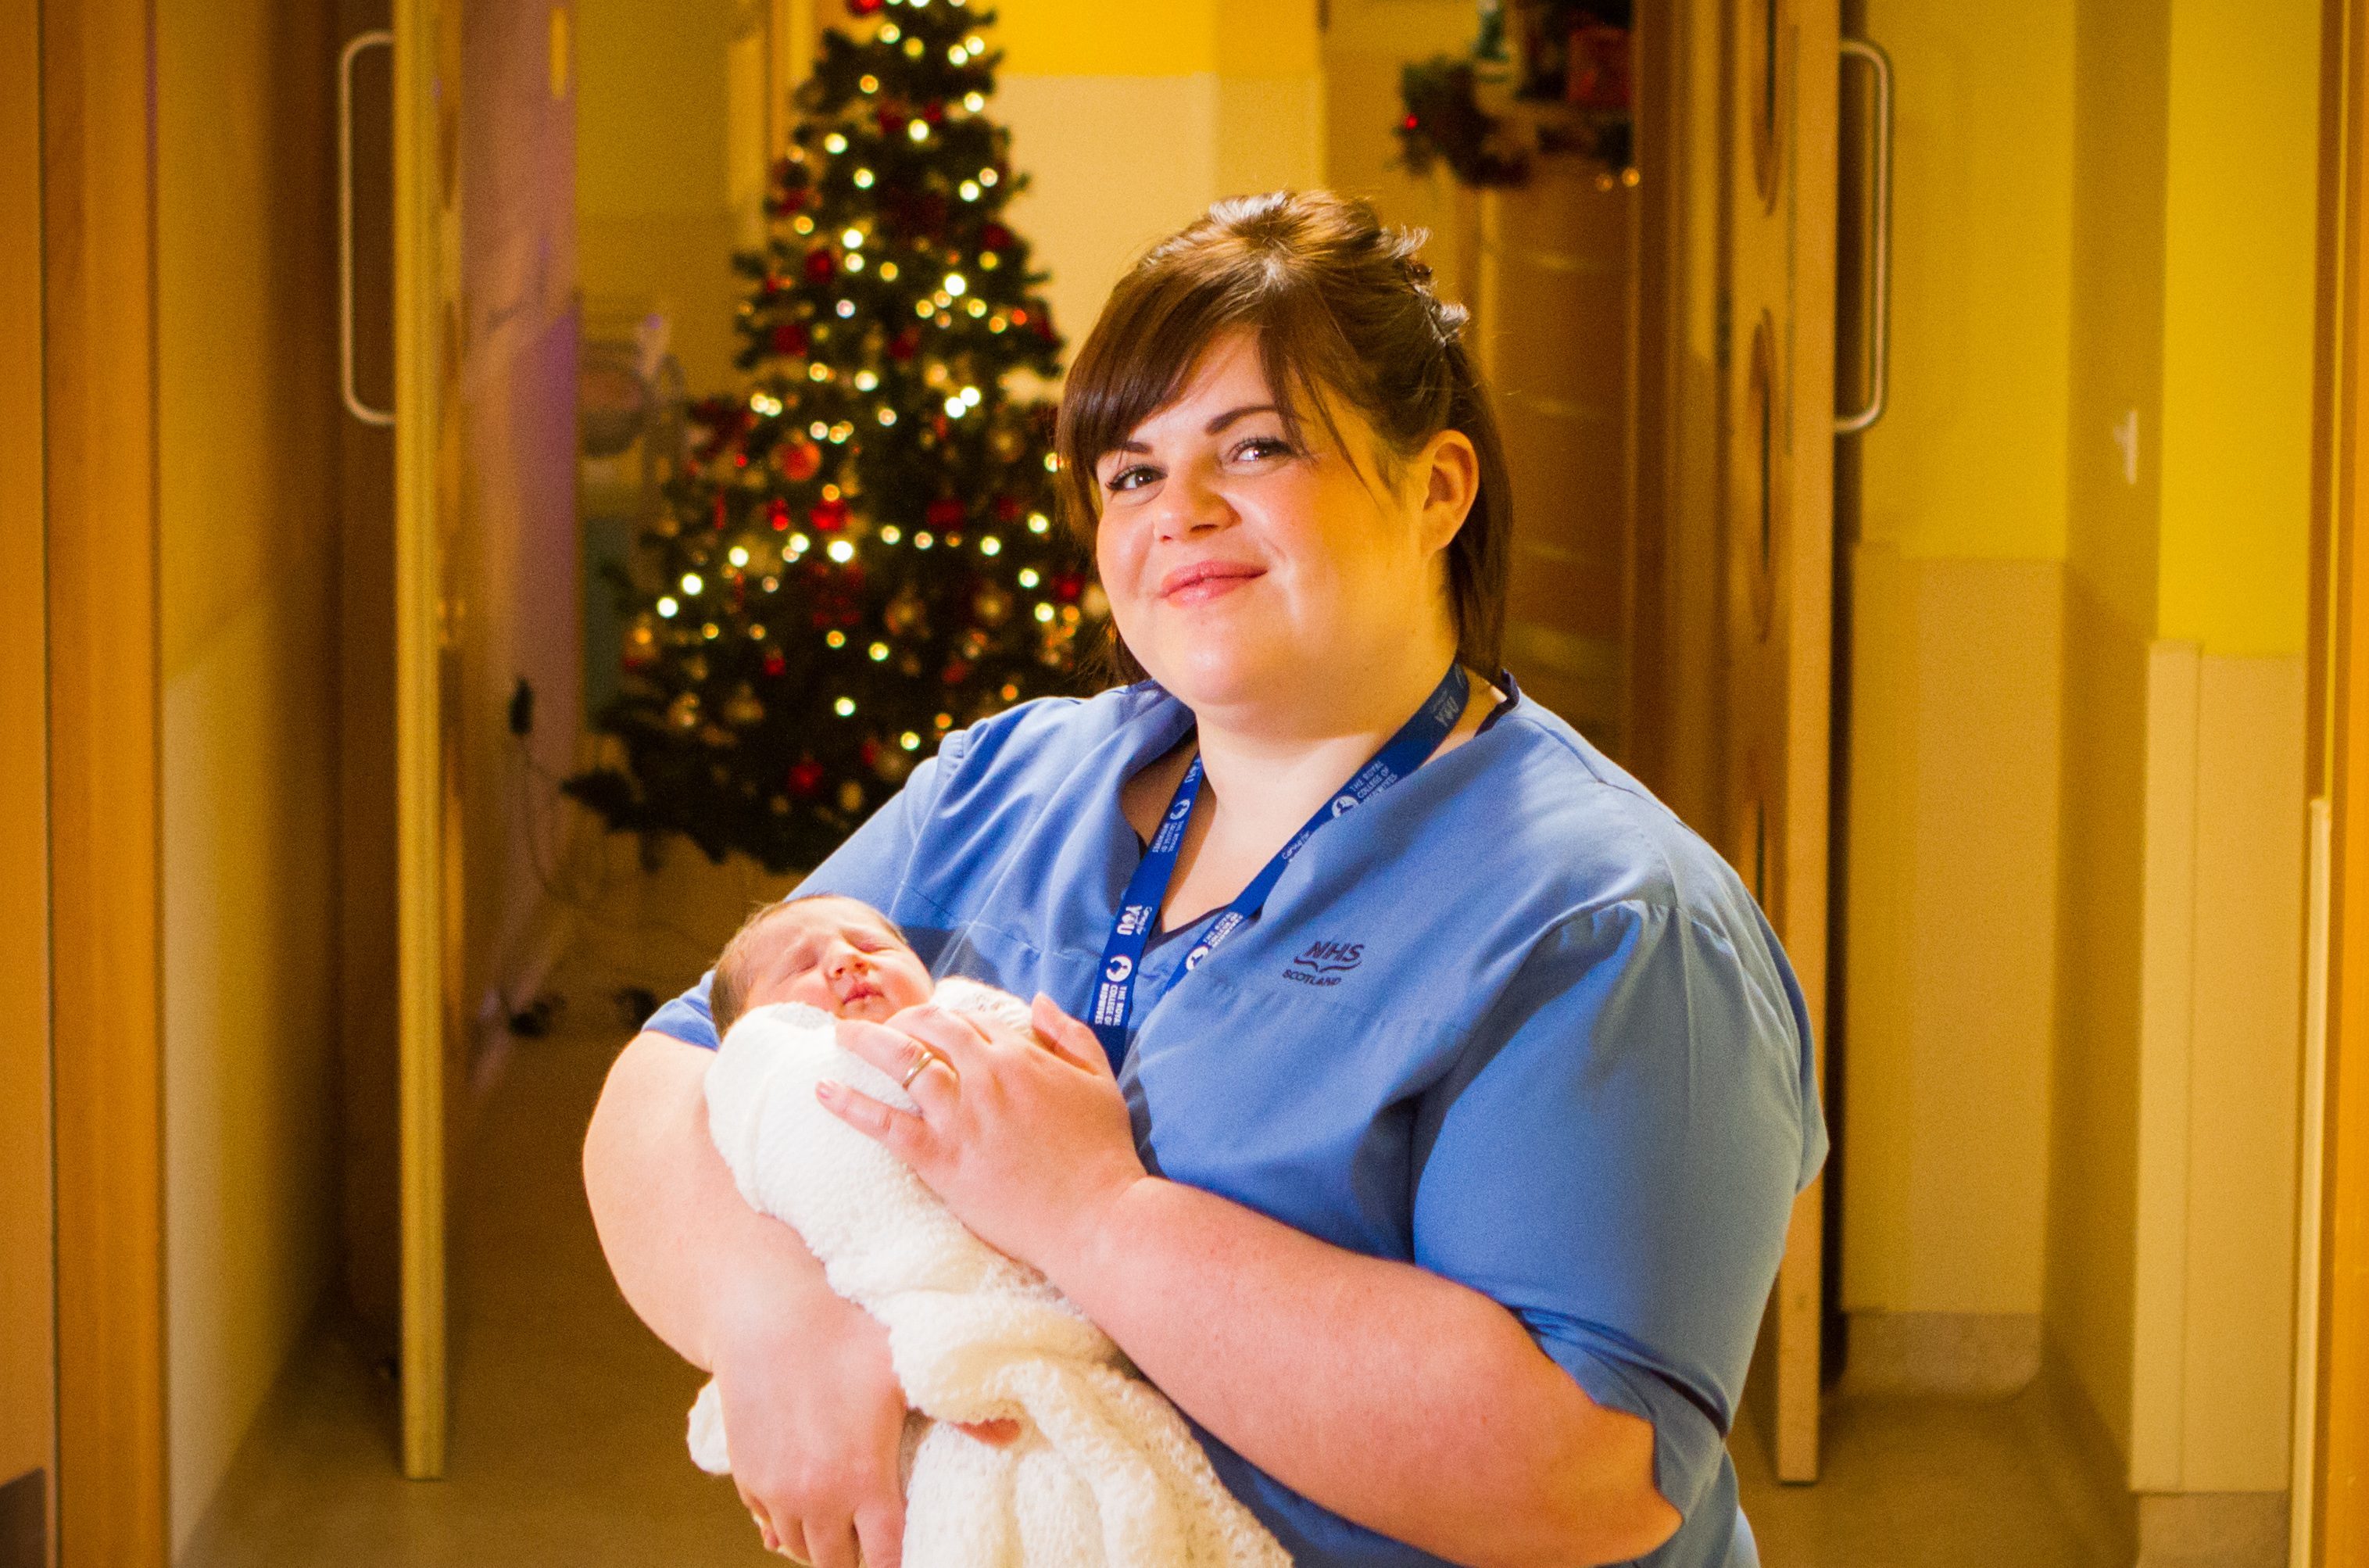 Lucy McIndoe with a newborn baby at Dundee Midwifery Unit.